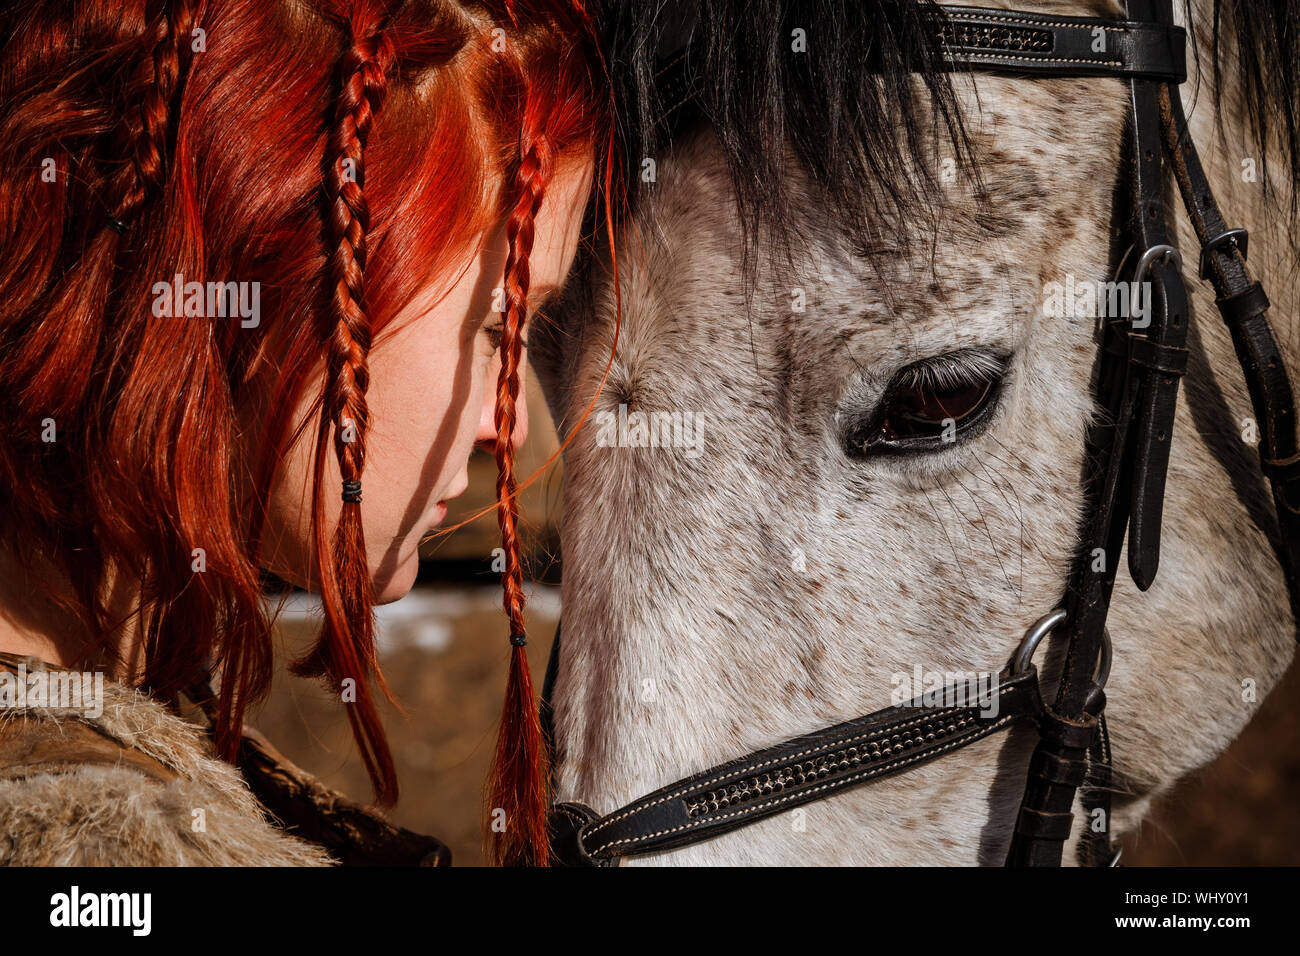 Red-haired woman with a faithful horse preparing for battle Stock Photo